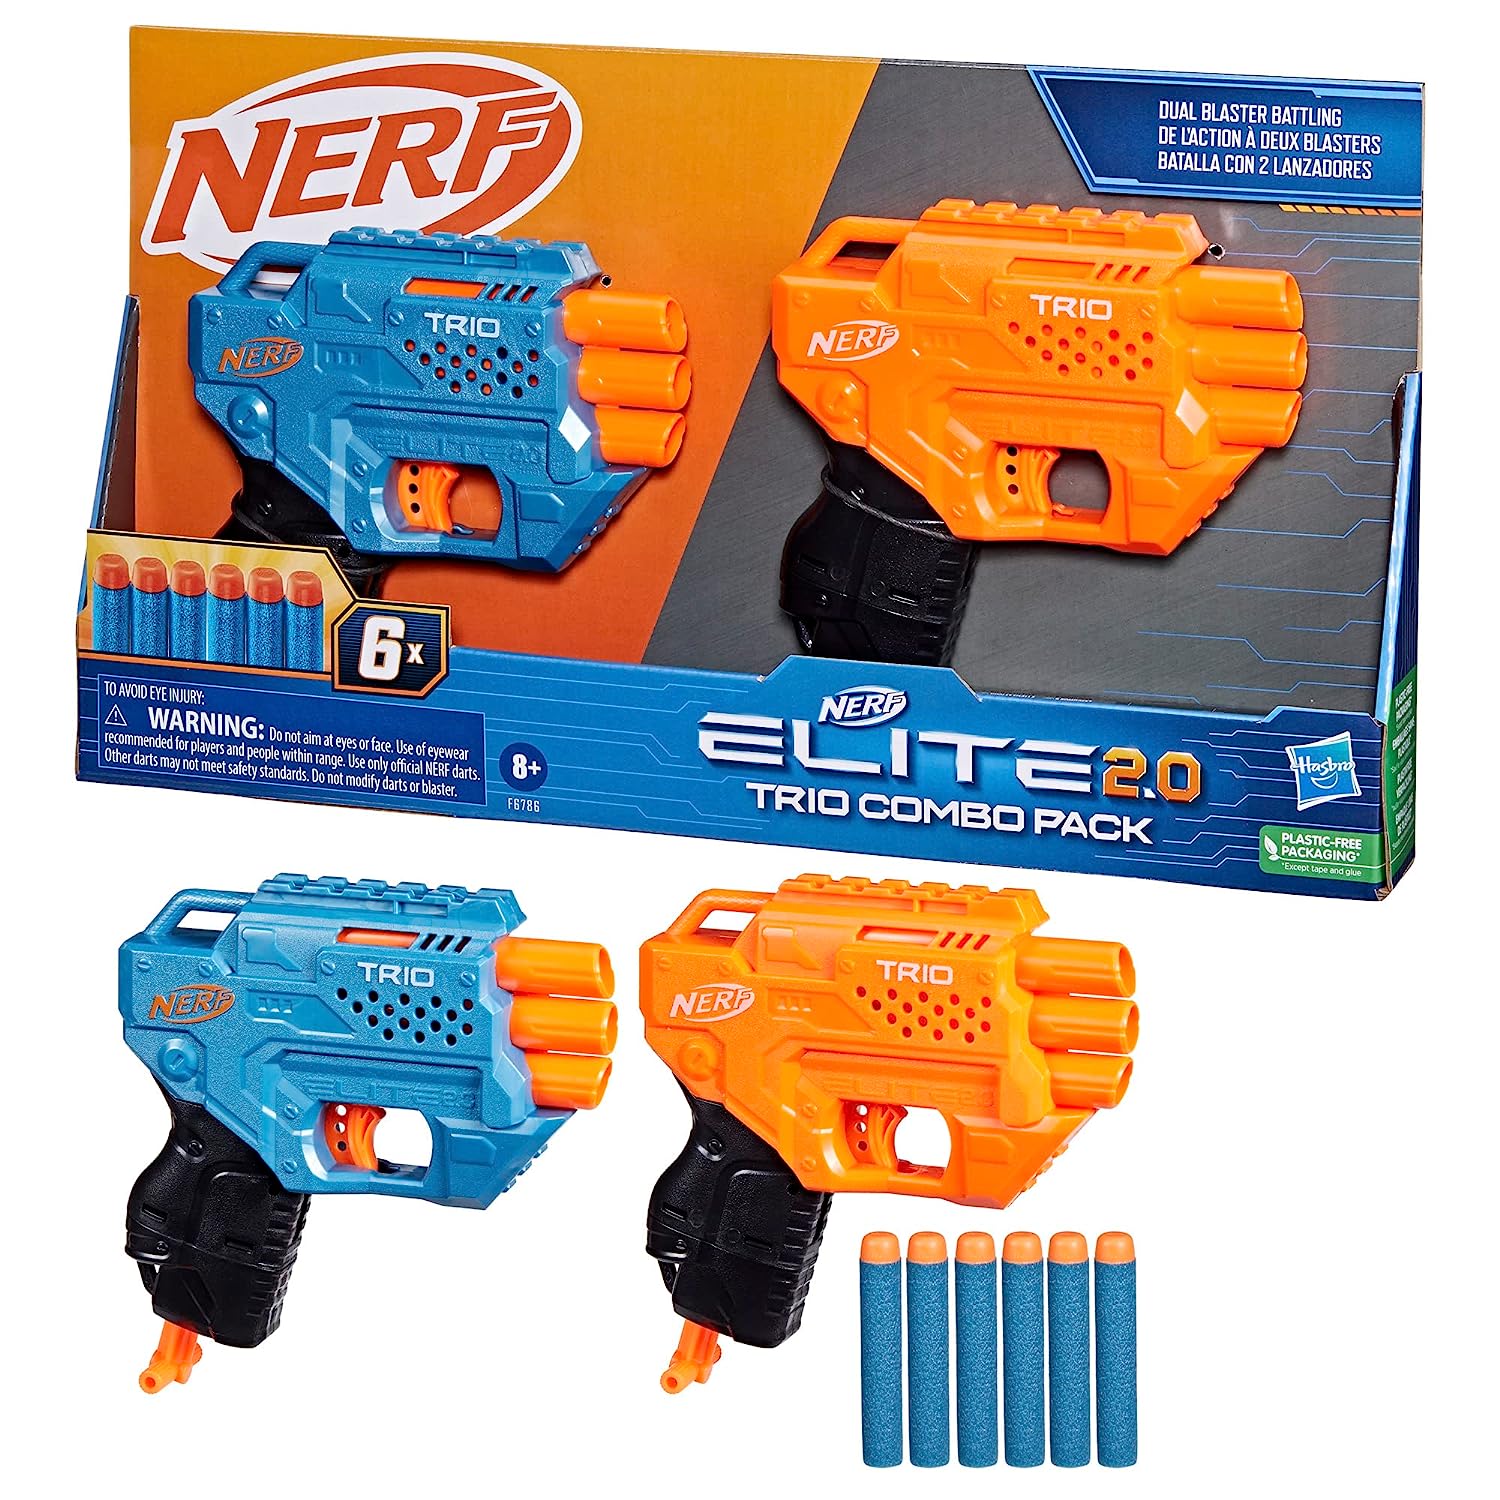 Nerf Elite 2.0 Trio Combo Pack, 2 Trio Nerf Blasters - Blue and